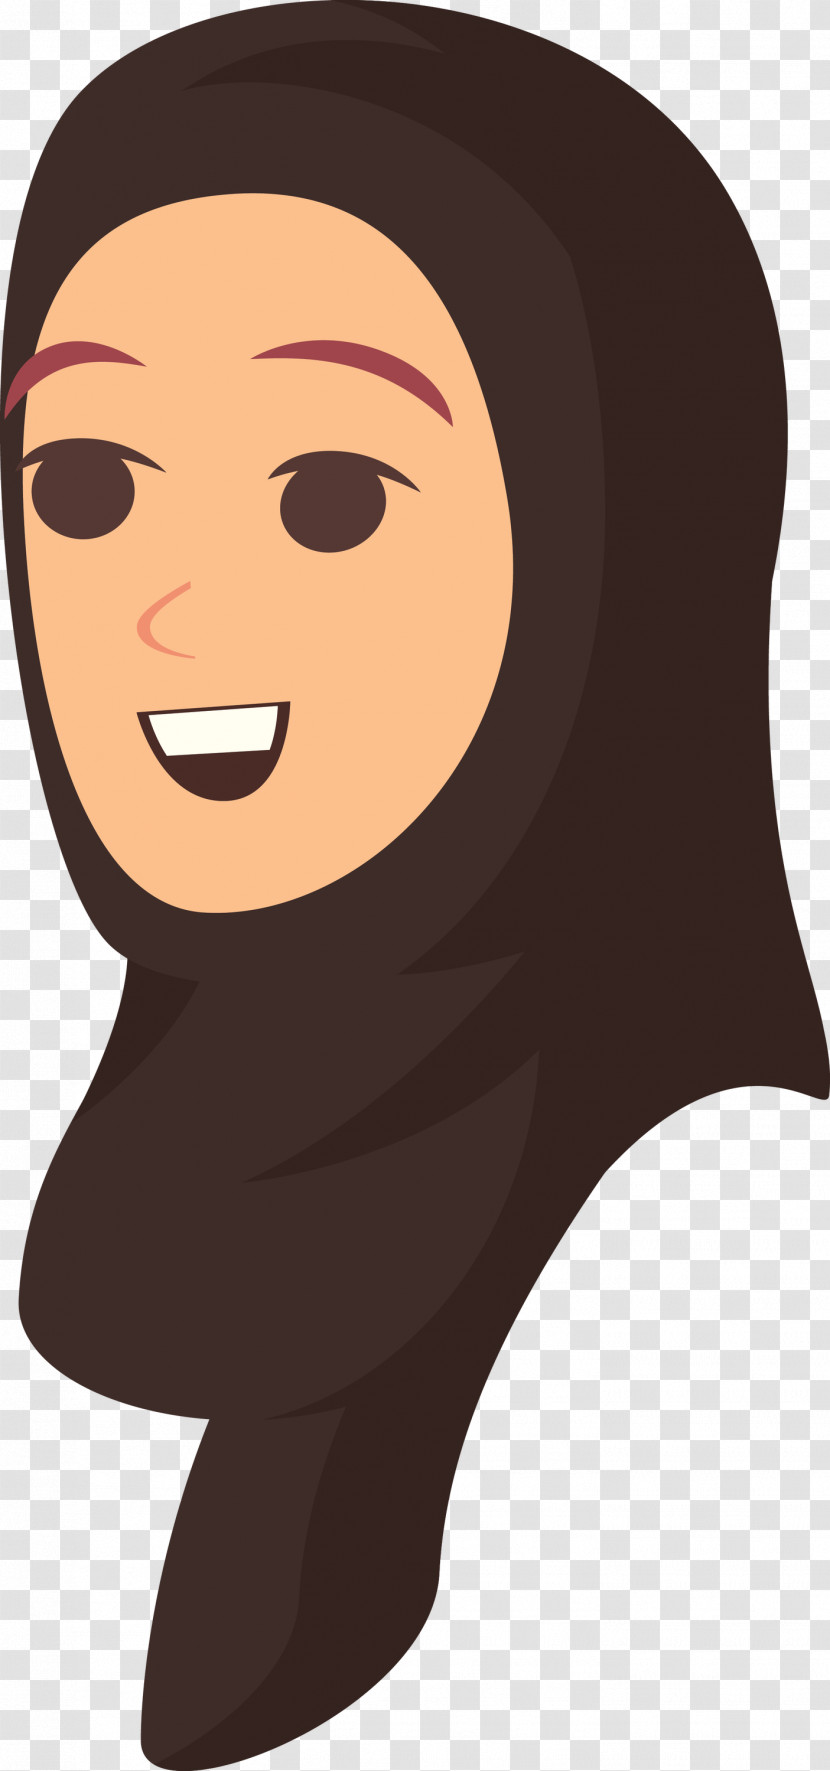 Facial Hair Forehead Character Hair Beauty.m Transparent PNG